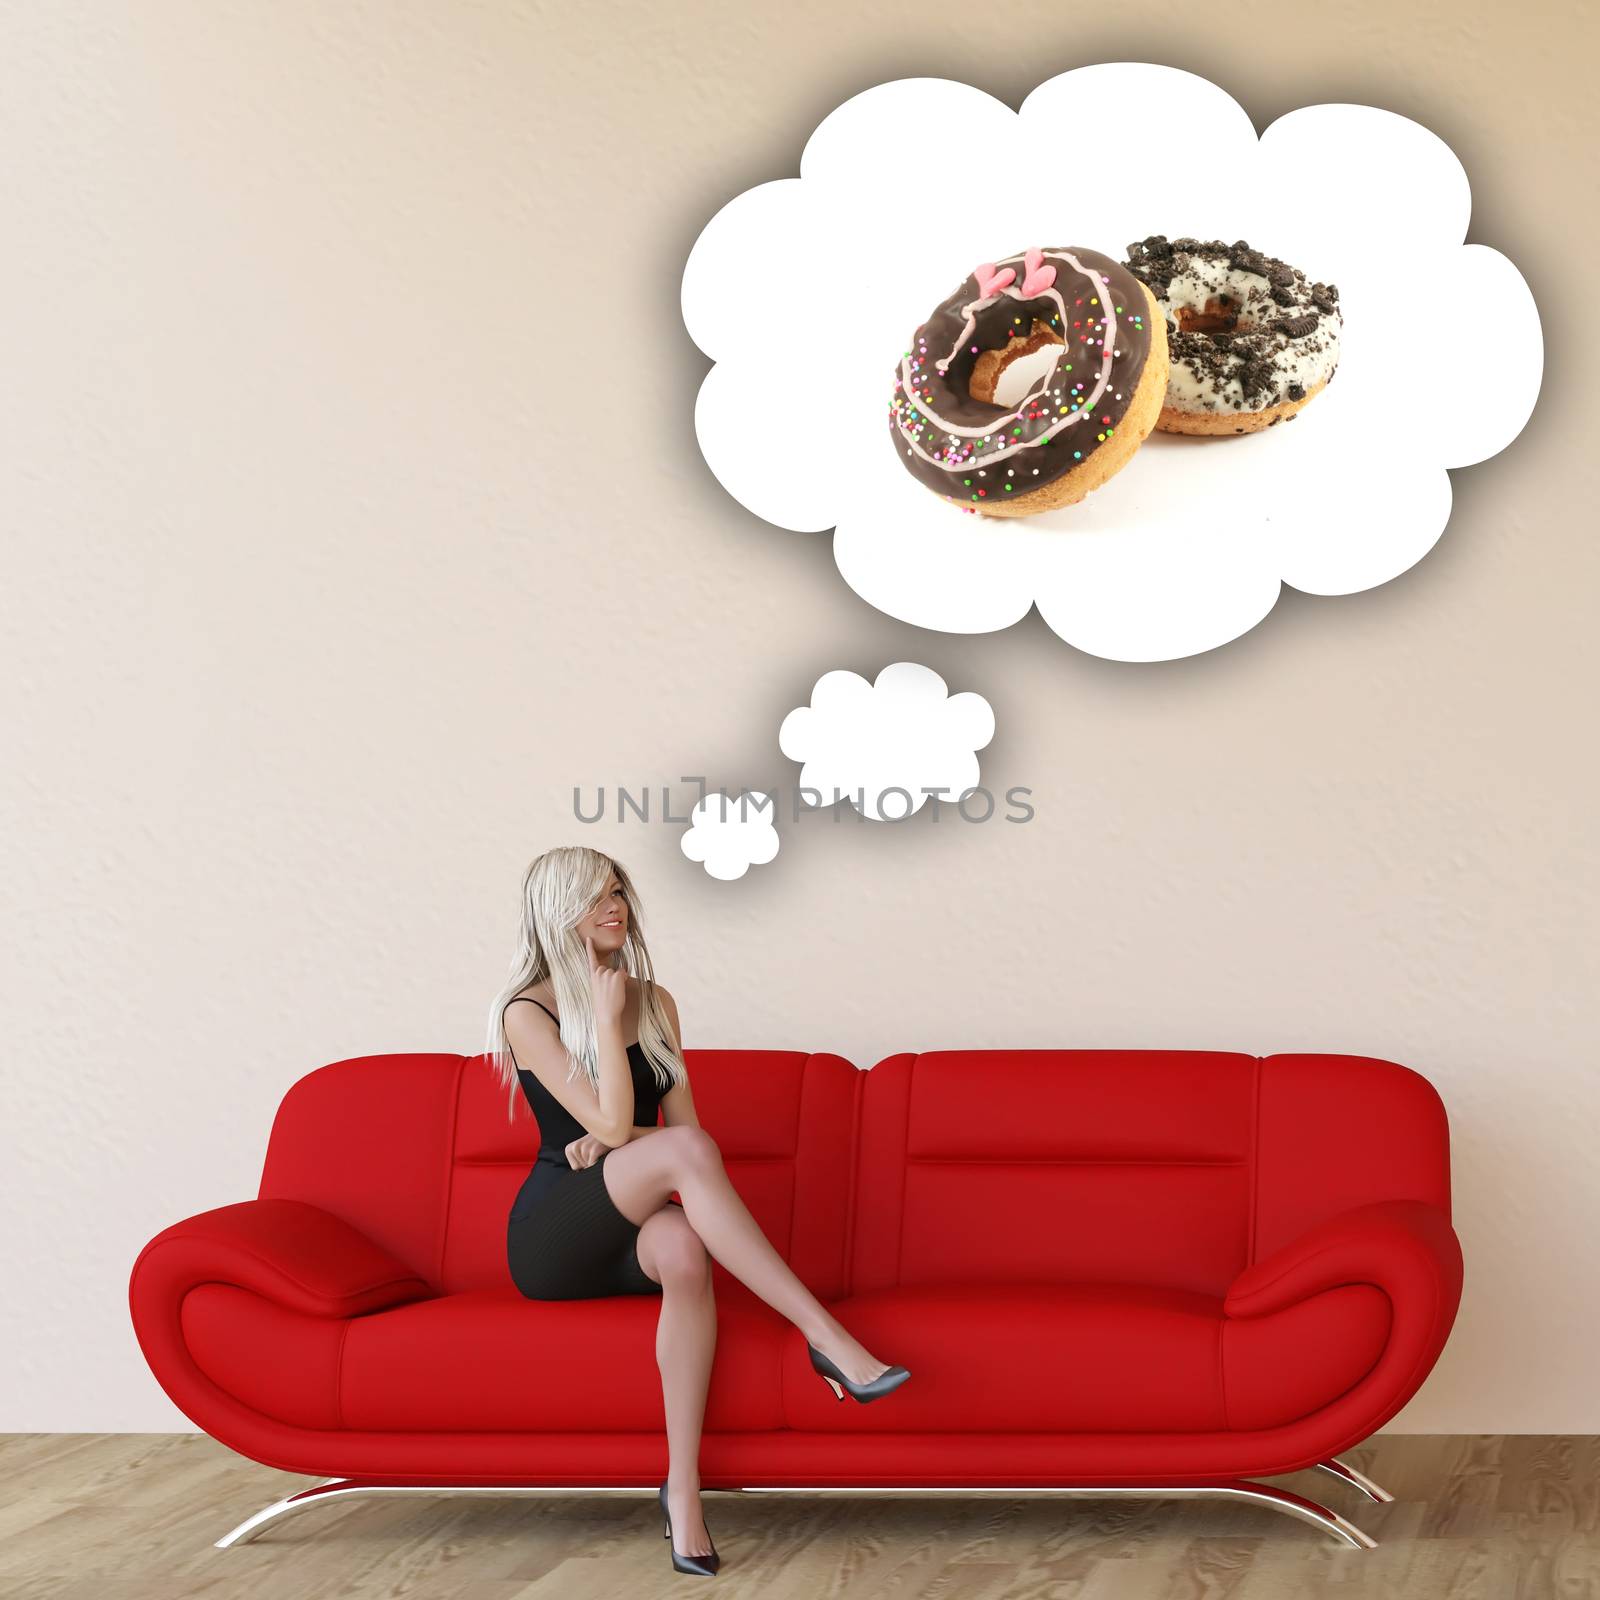 Woman Craving Donuts and Thinking About Eating Food